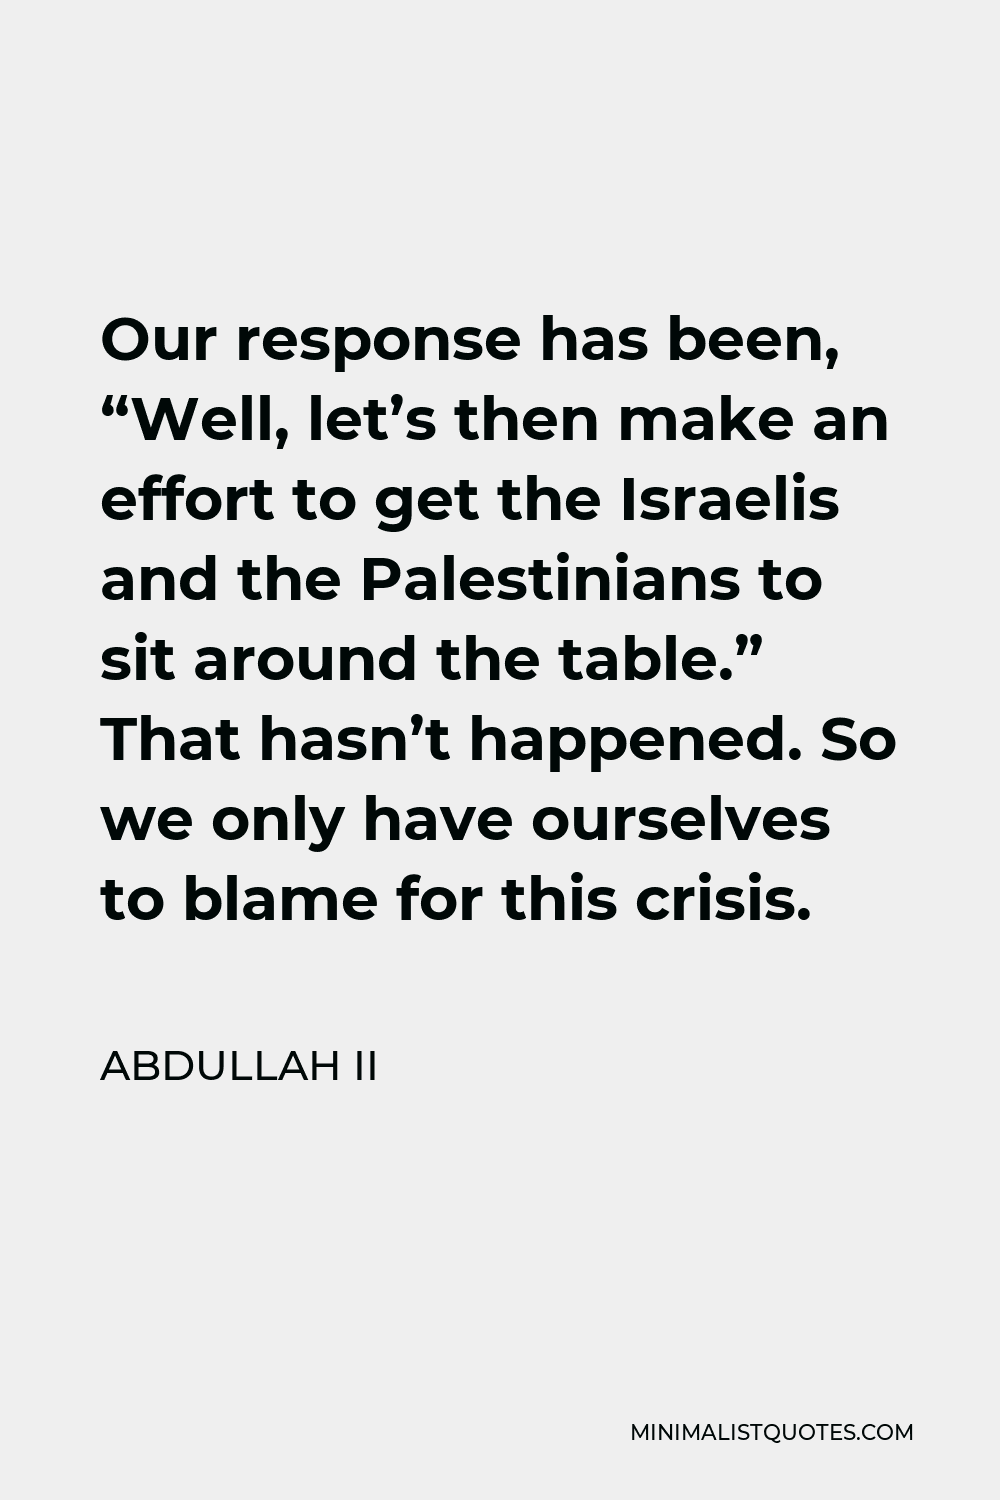 Abdullah II Quote - Our response has been, “Well, let’s then make an effort to get the Israelis and the Palestinians to sit around the table.” That hasn’t happened. So we only have ourselves to blame for this crisis.